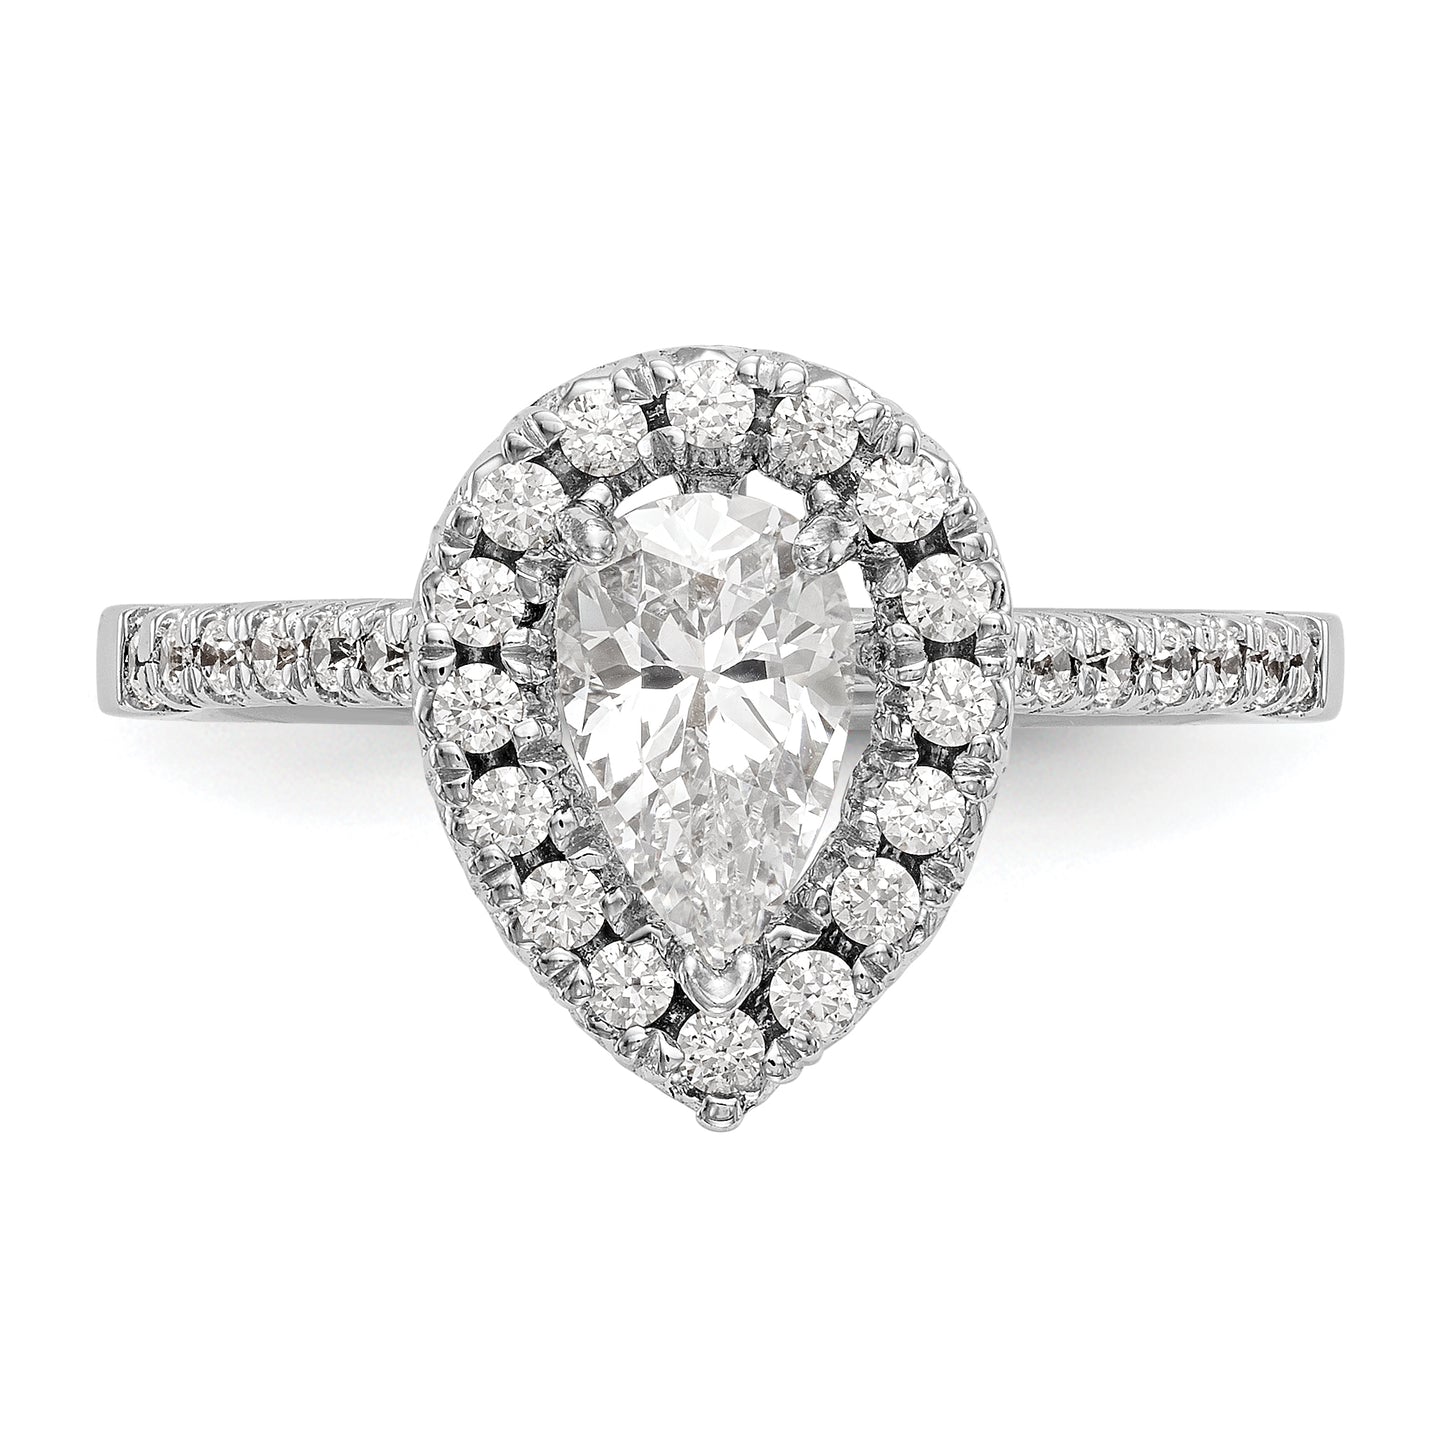 14KW DIAMOND PEAR SHAPED HALO TO FIT 3/4 CT CTR